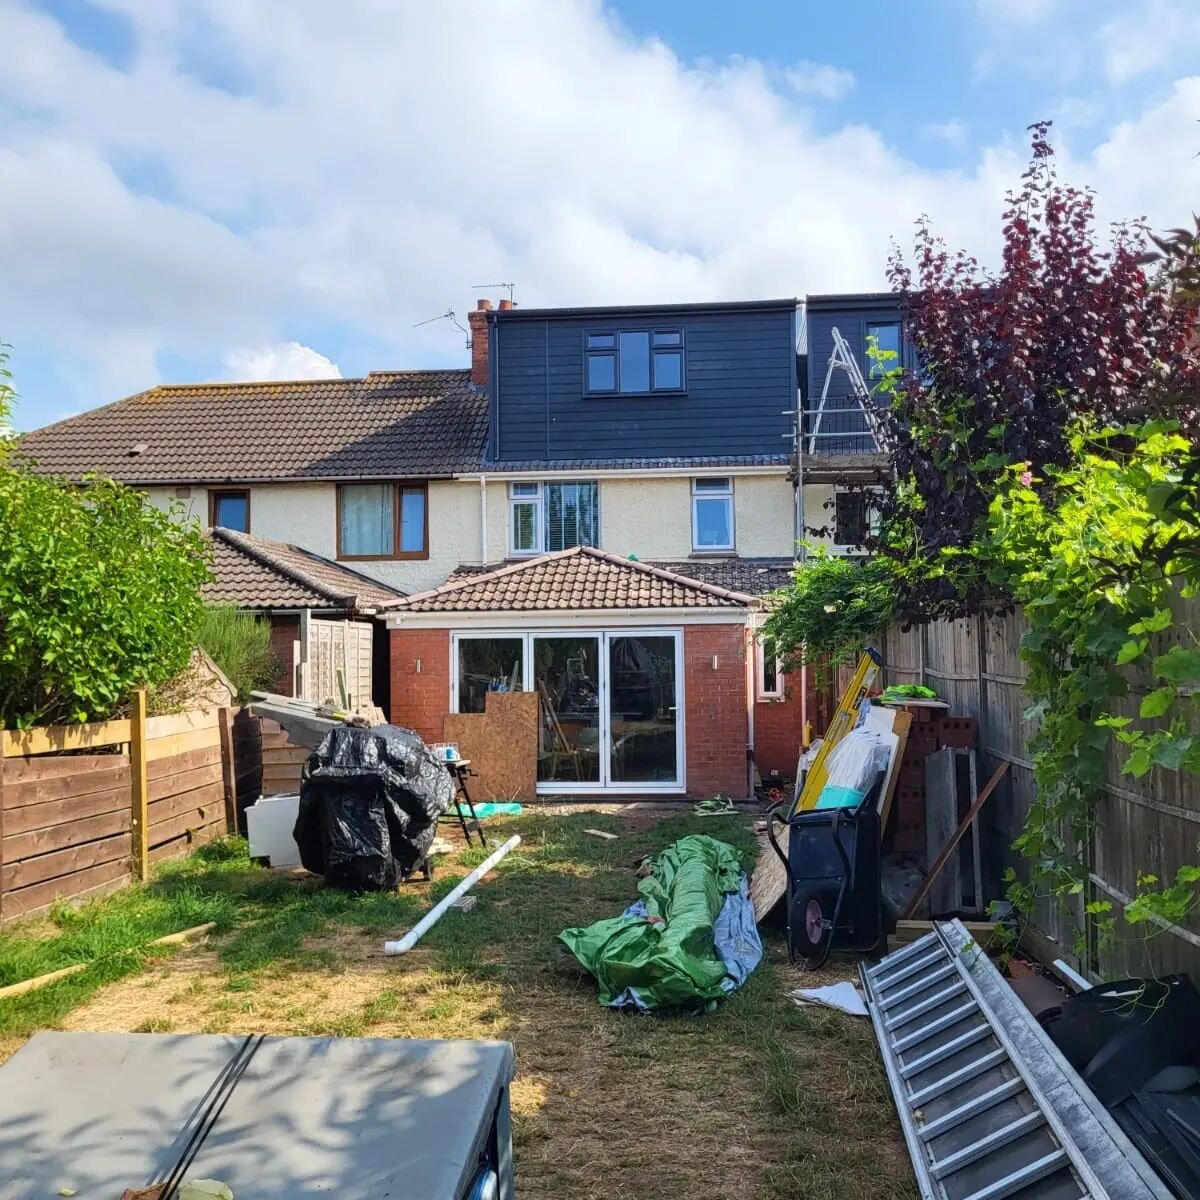 🟠 Exciting day yesterday on are Wembdon project 🥳  the scaffolding is down on the loft conversion we have completed and looks fantastic 😍 inside is all plastered out and second fix completed just the painting 🖌left to complete by the customer 🤩
